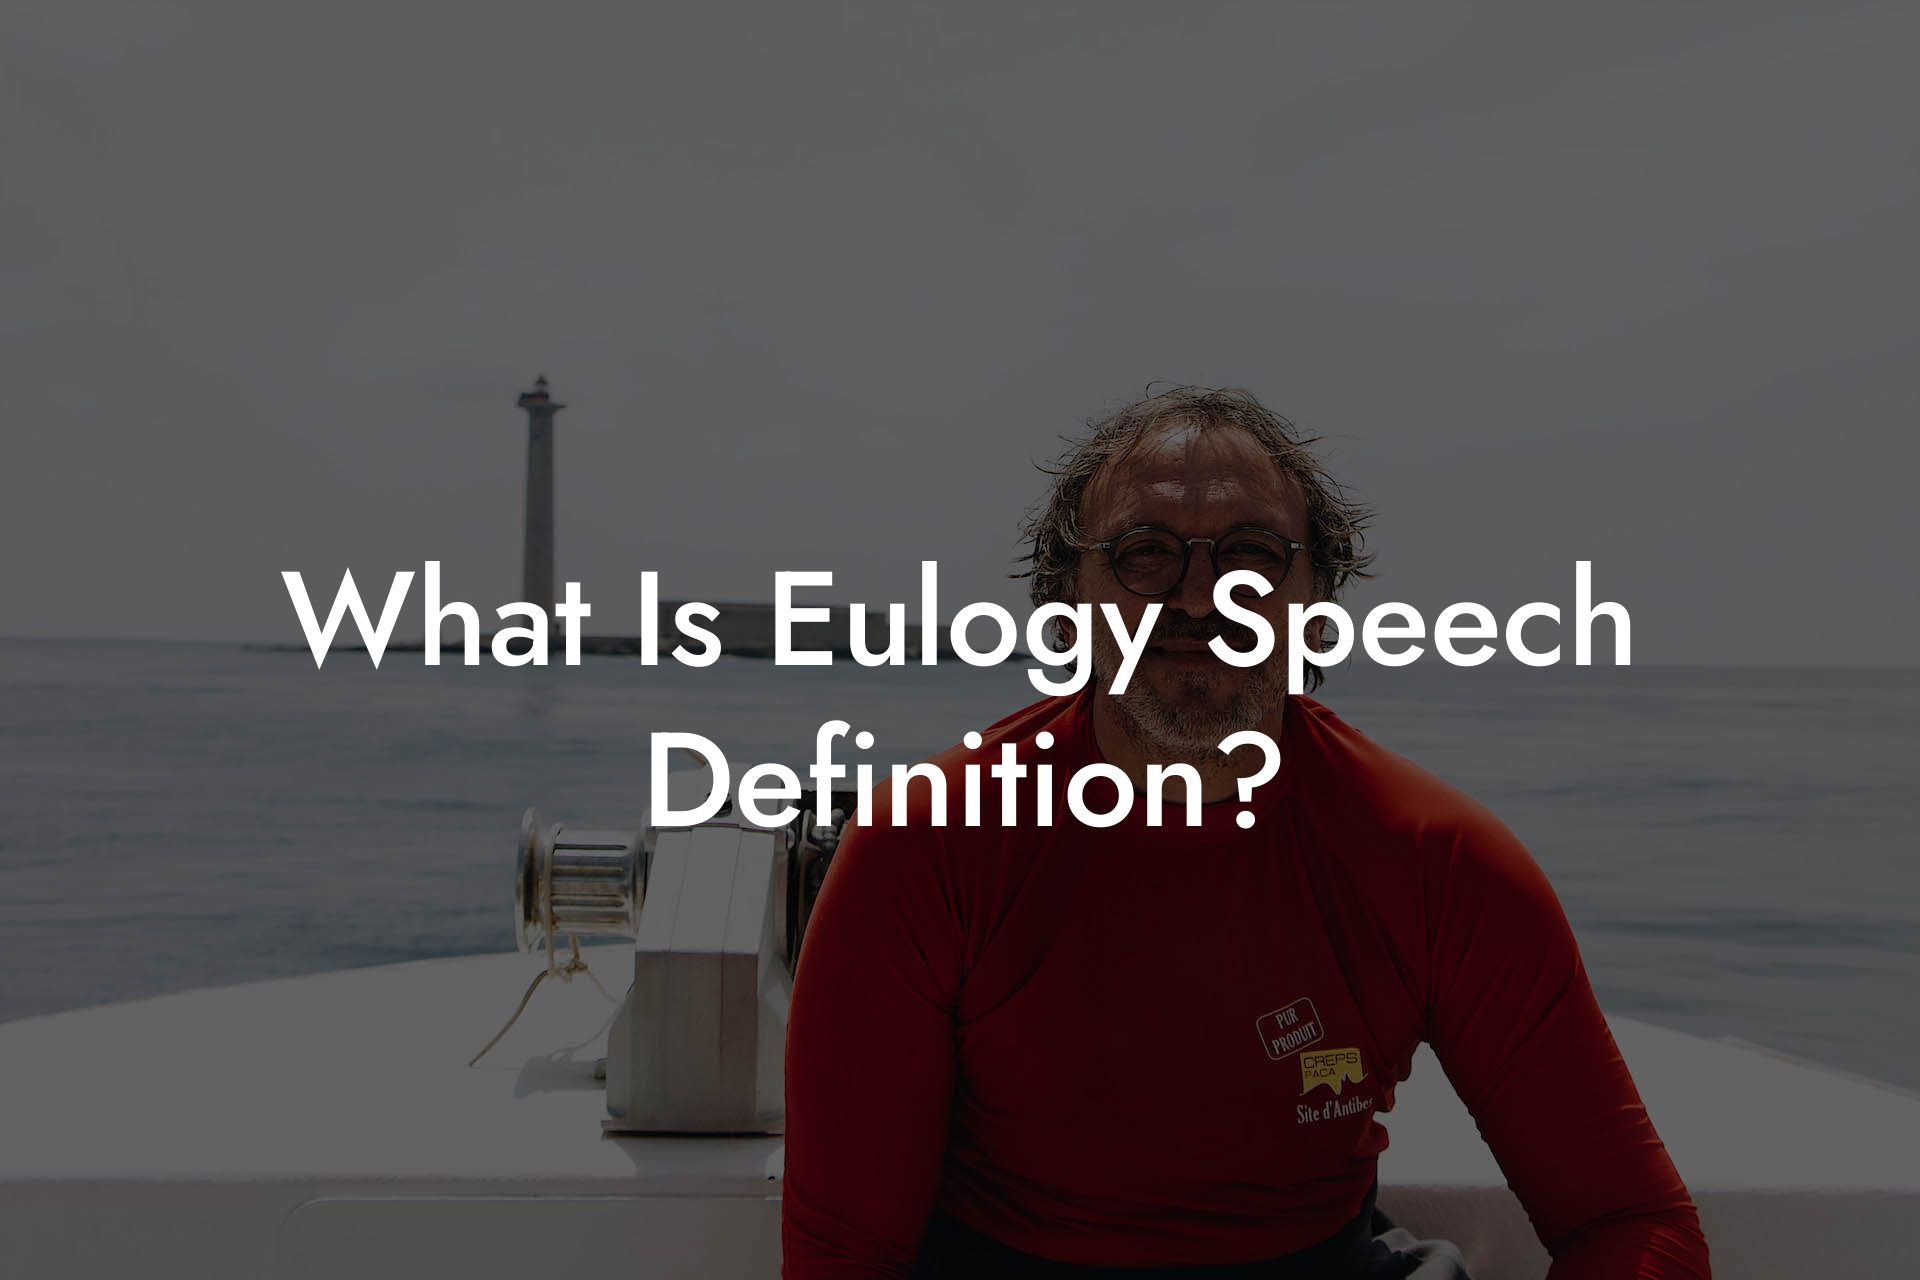 What Is Eulogy Speech Definition?